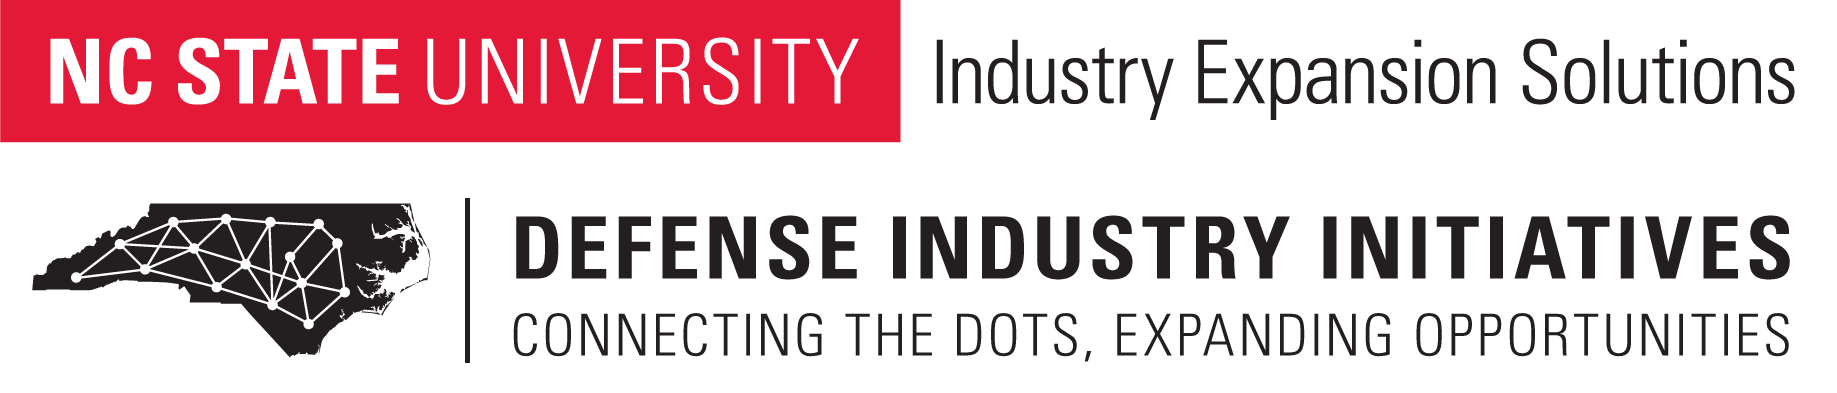 NC State University Industry Expansion Solutions Defense Industry Initiatives 